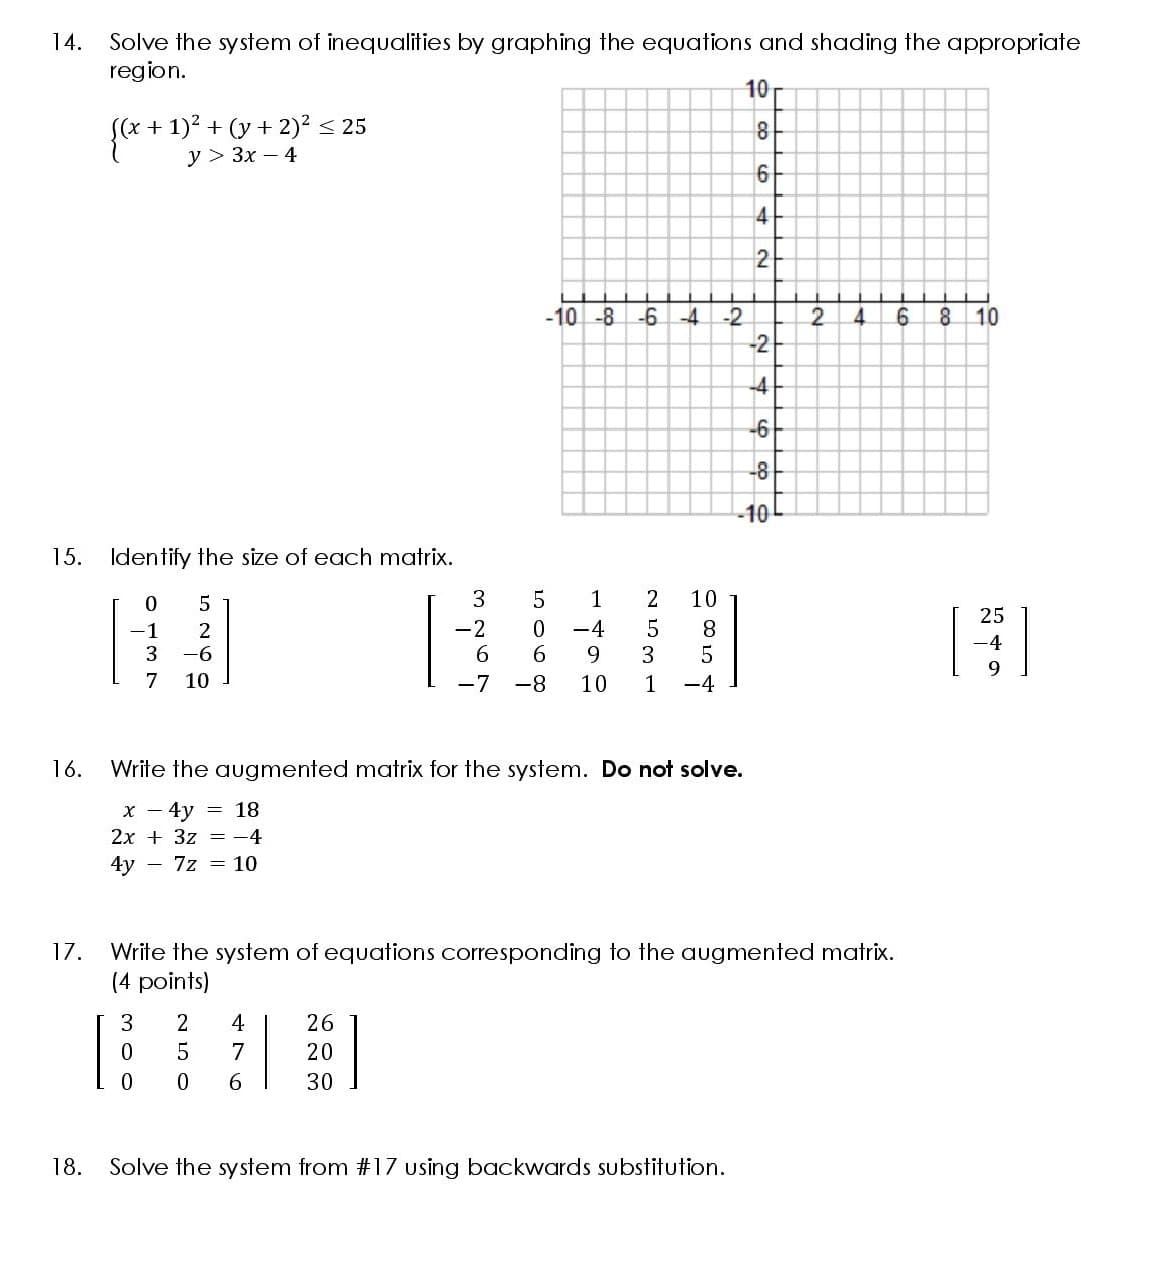 14.
Solve the system of inequalities by graphing the equations and shading the appropriate
region.
10
S(x + 1)² + (y + 2)2 < 25
У > Зх — 4
{*
+ ", 3x -4
8
6
4
2
-10 -8 -6-4
8 10
-2
2.
-2
4.
-6
-8
-10
15. Identify the size of each matrix.
1
2
10
25
-2
-4
3
9.
-1
2
8
-4
3
-6
7
10
-7
-8
10
1
-4
16.
Write the augmented matrix for the system. Do not solve.
x - 4y
= 18
2x + 3z = -4
4y - 7z = 10
17.
Write the system of equations corresponding to the augmented matrix.
(4 points)
3
2
26
0.
5
20
30
18.
Solve the system from #17 using backwards substitution.
O co
476
